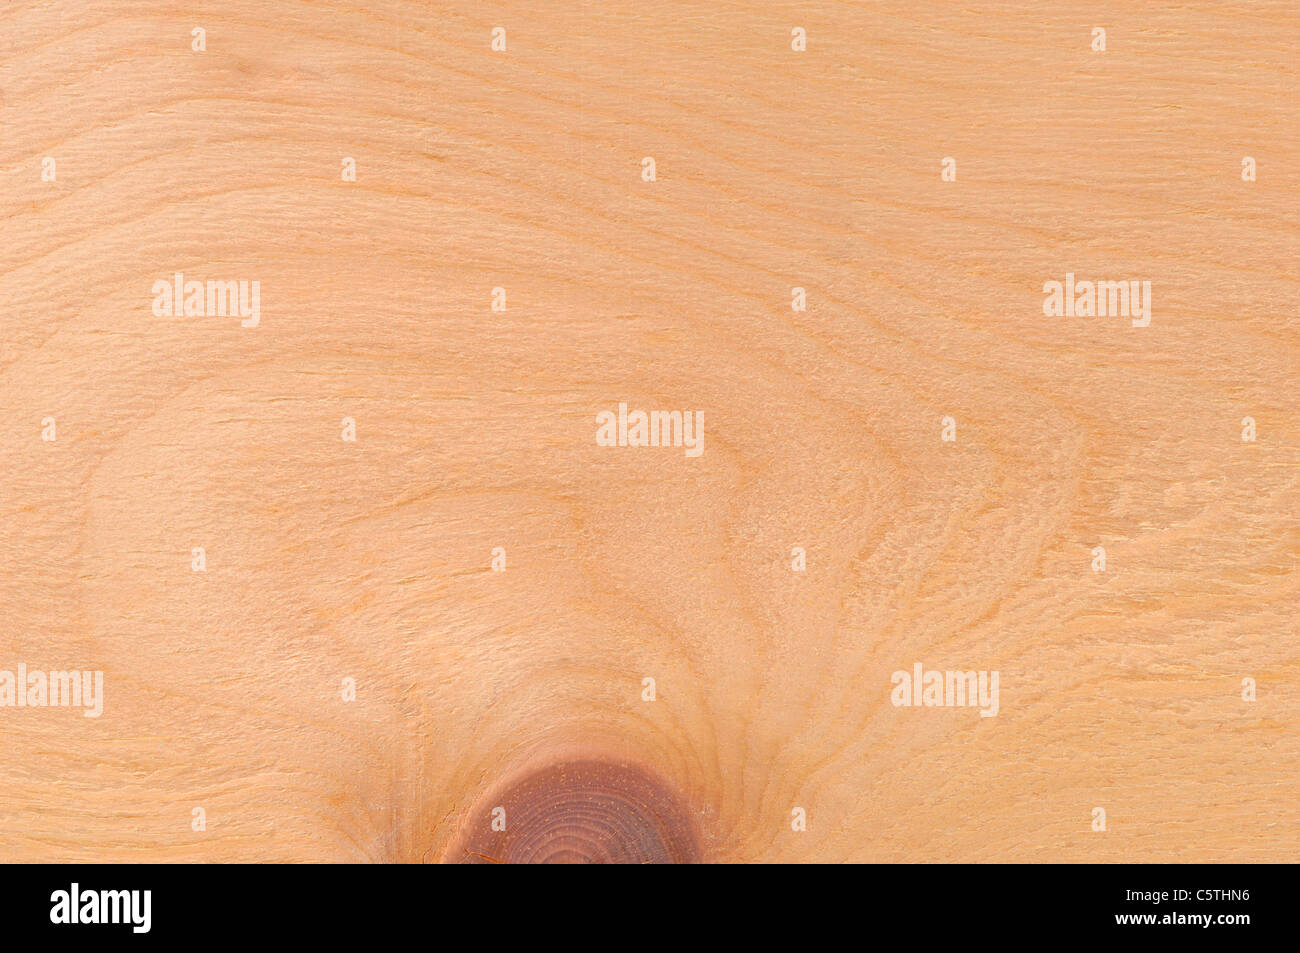 Wood surface,  Cembra pine wood (Pinus cembra) full frame Stock Photo